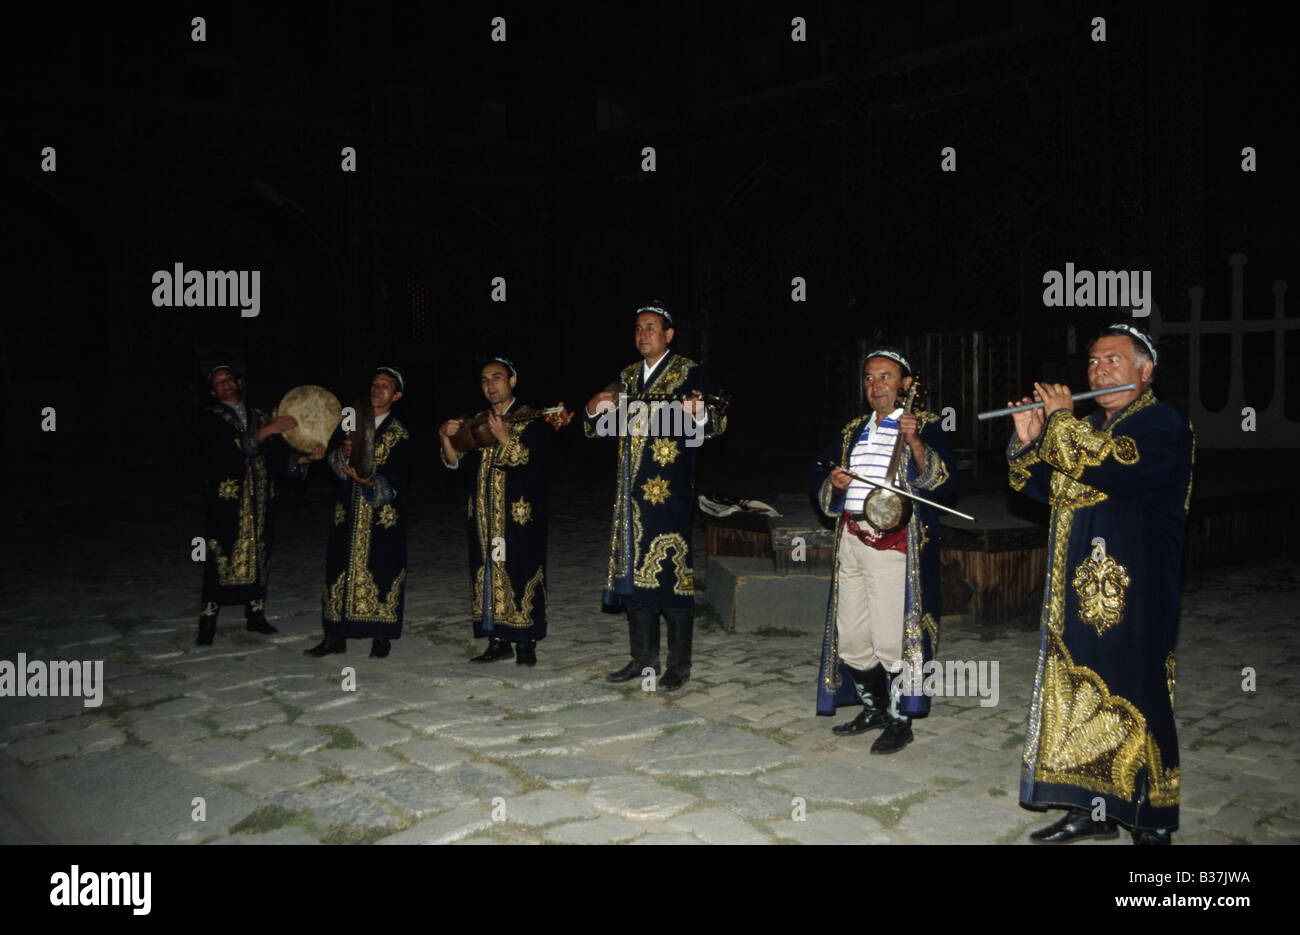 Group of musicians band In dark robes with gold decoration Musical instruments SAMARKAND UZBEKISTAN Stock Photo